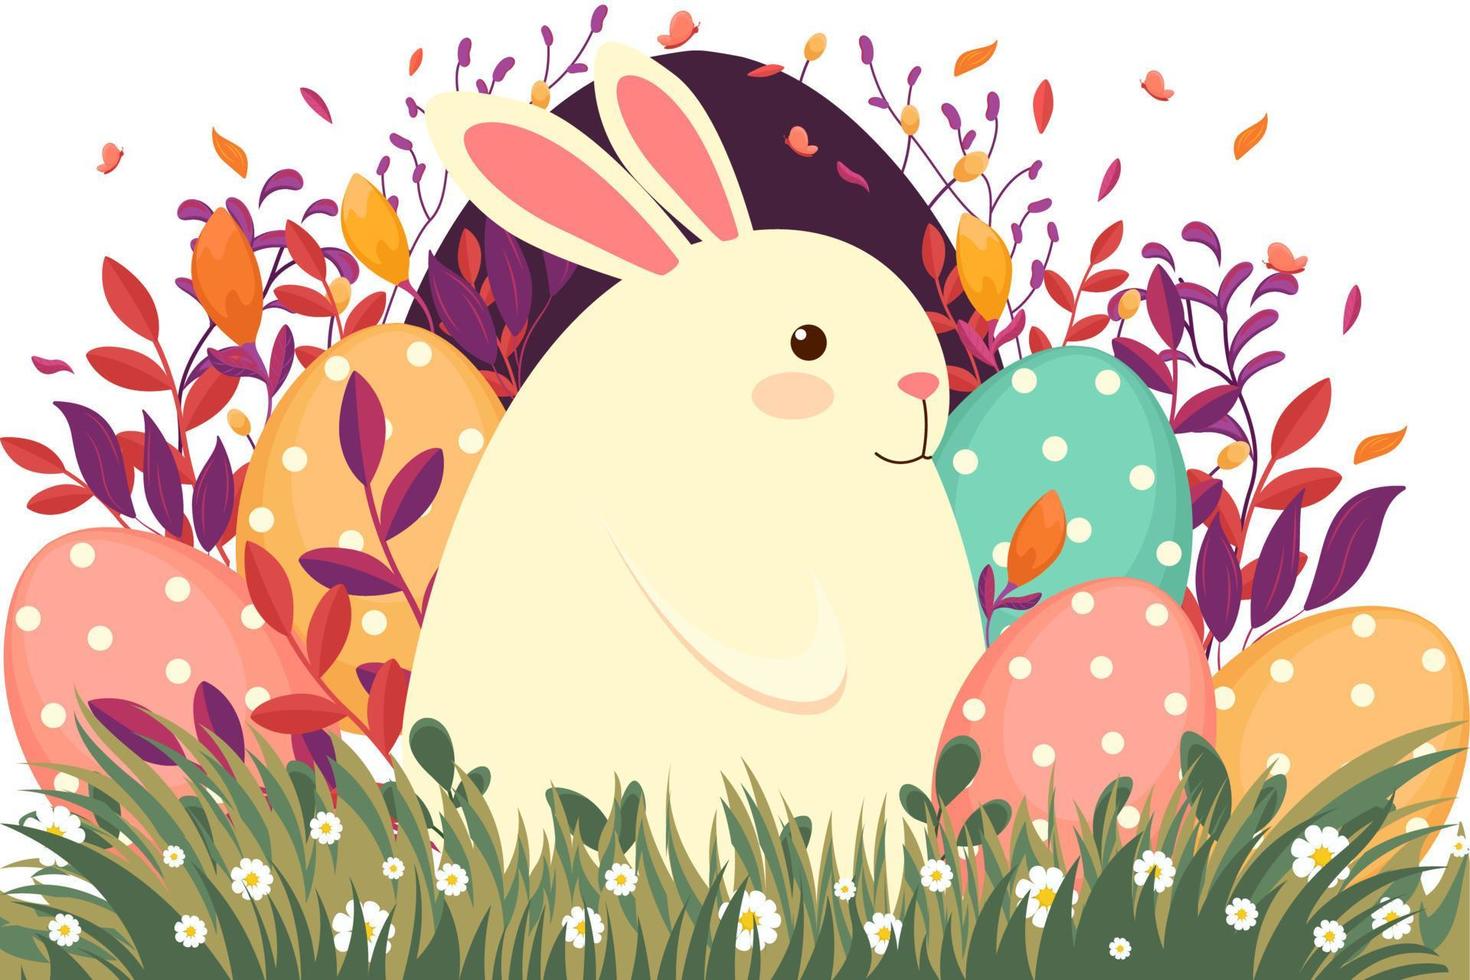 Easter illustration with flowers, Easter eggs, flowers, nature and spring, seasonal card, holiday illustration vector